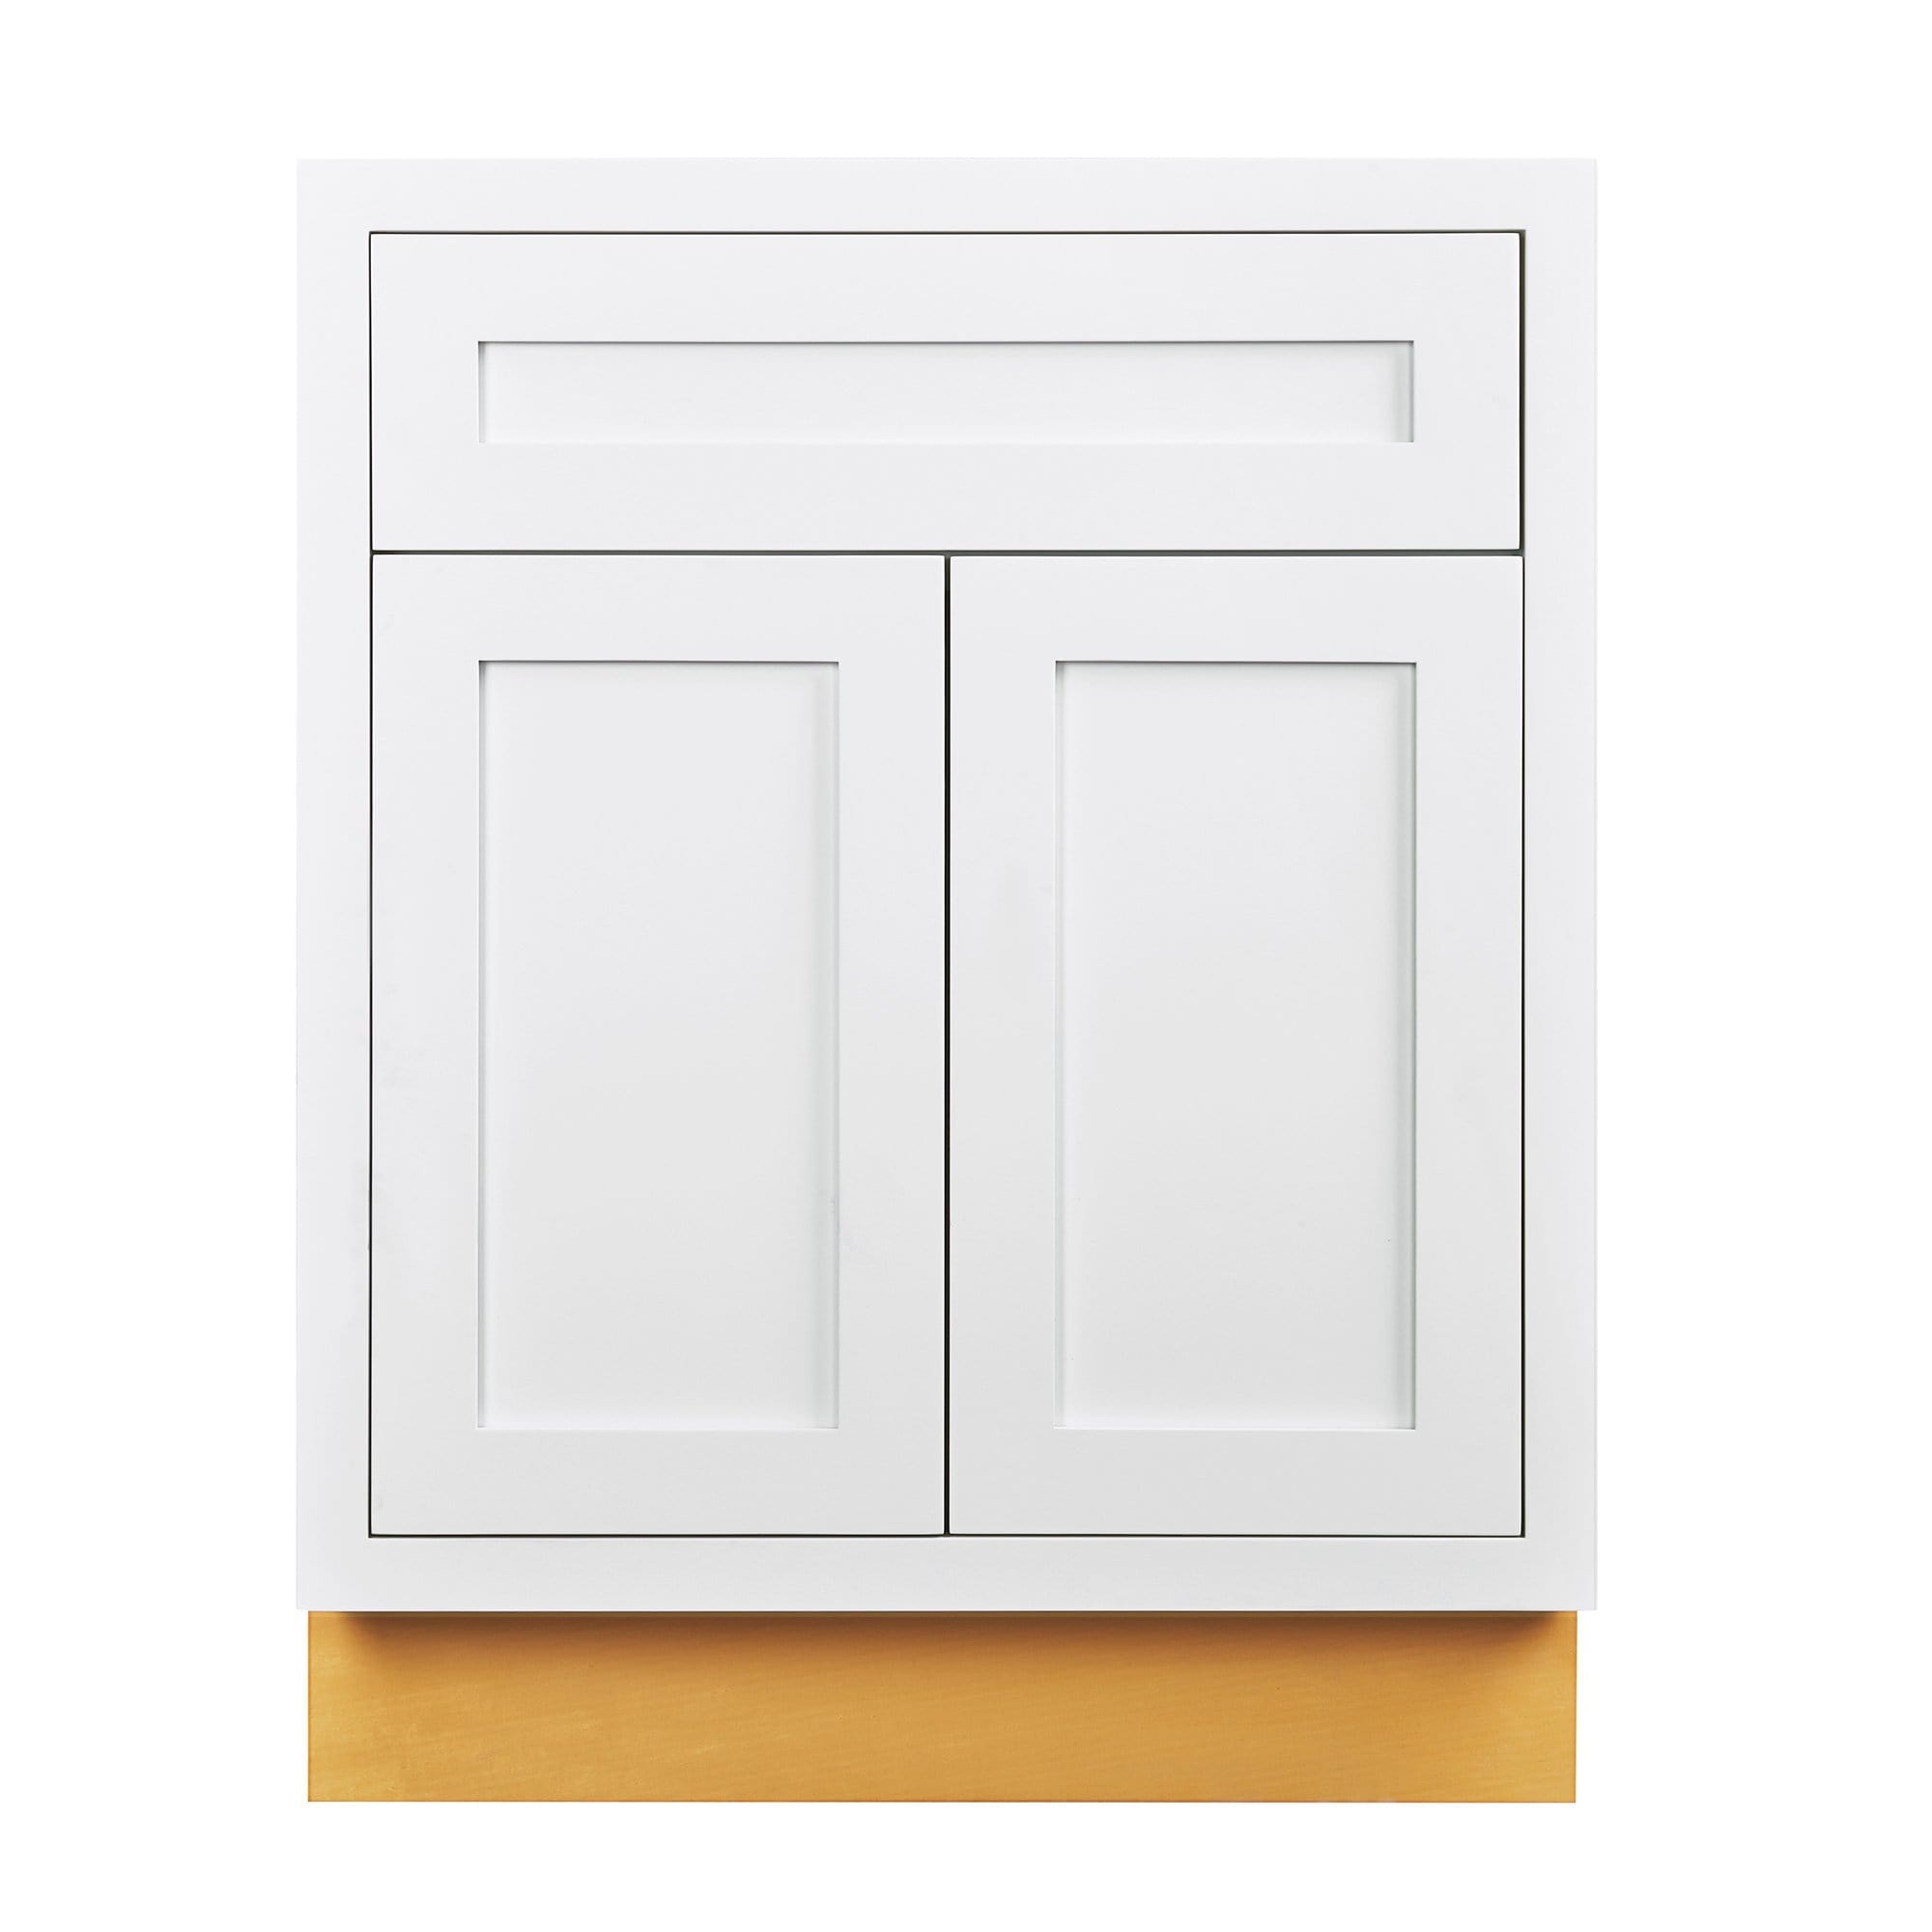 Snow White Inset Shaker Base Cabinet - Double Door 24"-27" Wide